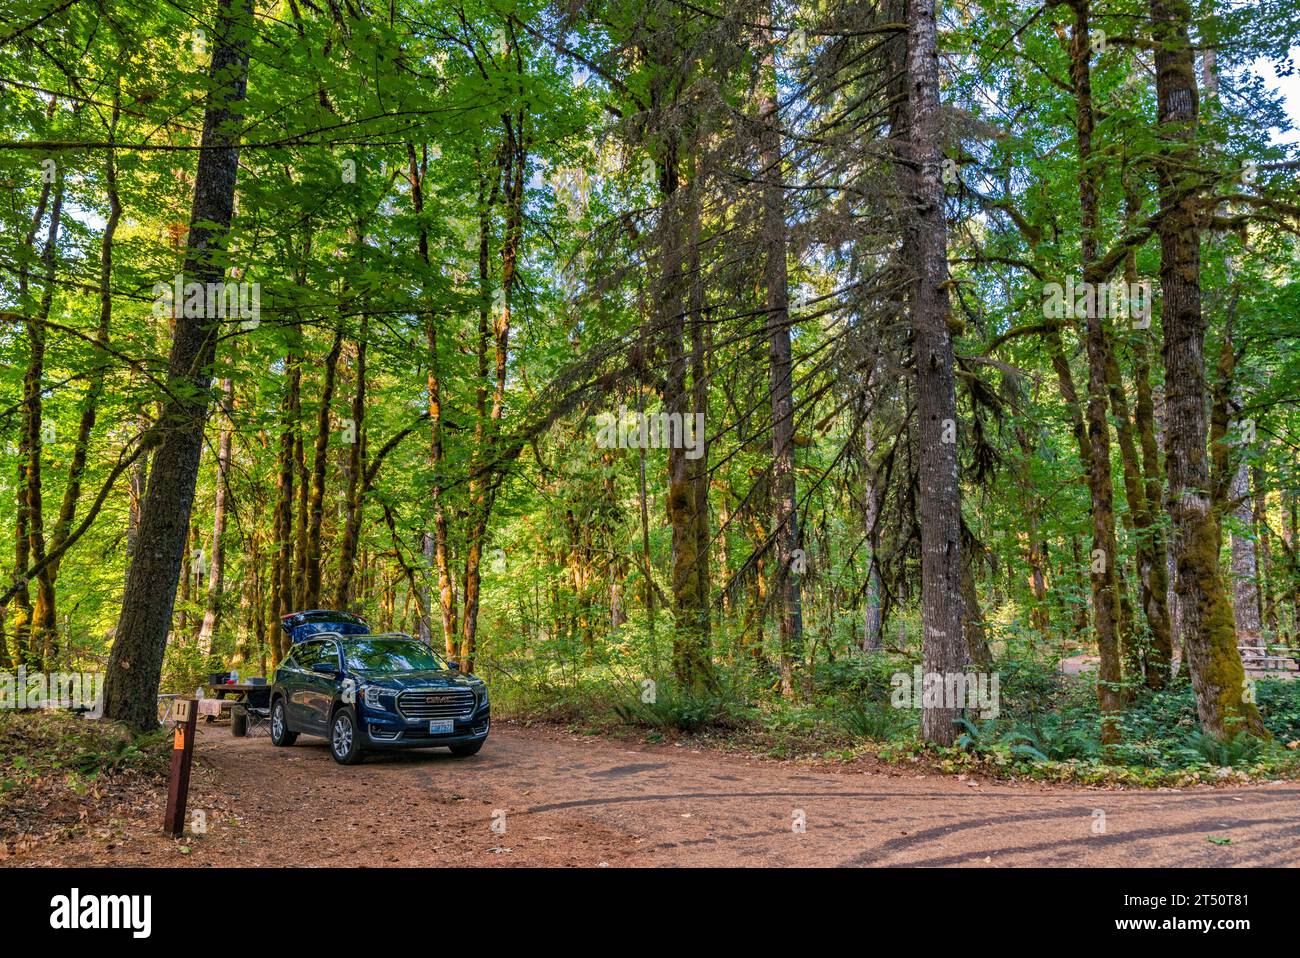 Old growth trees over campsite in Beaver Campground, Gifford Pinchot National Forest, near community of Stabler, Washington state, USA Stock Photo